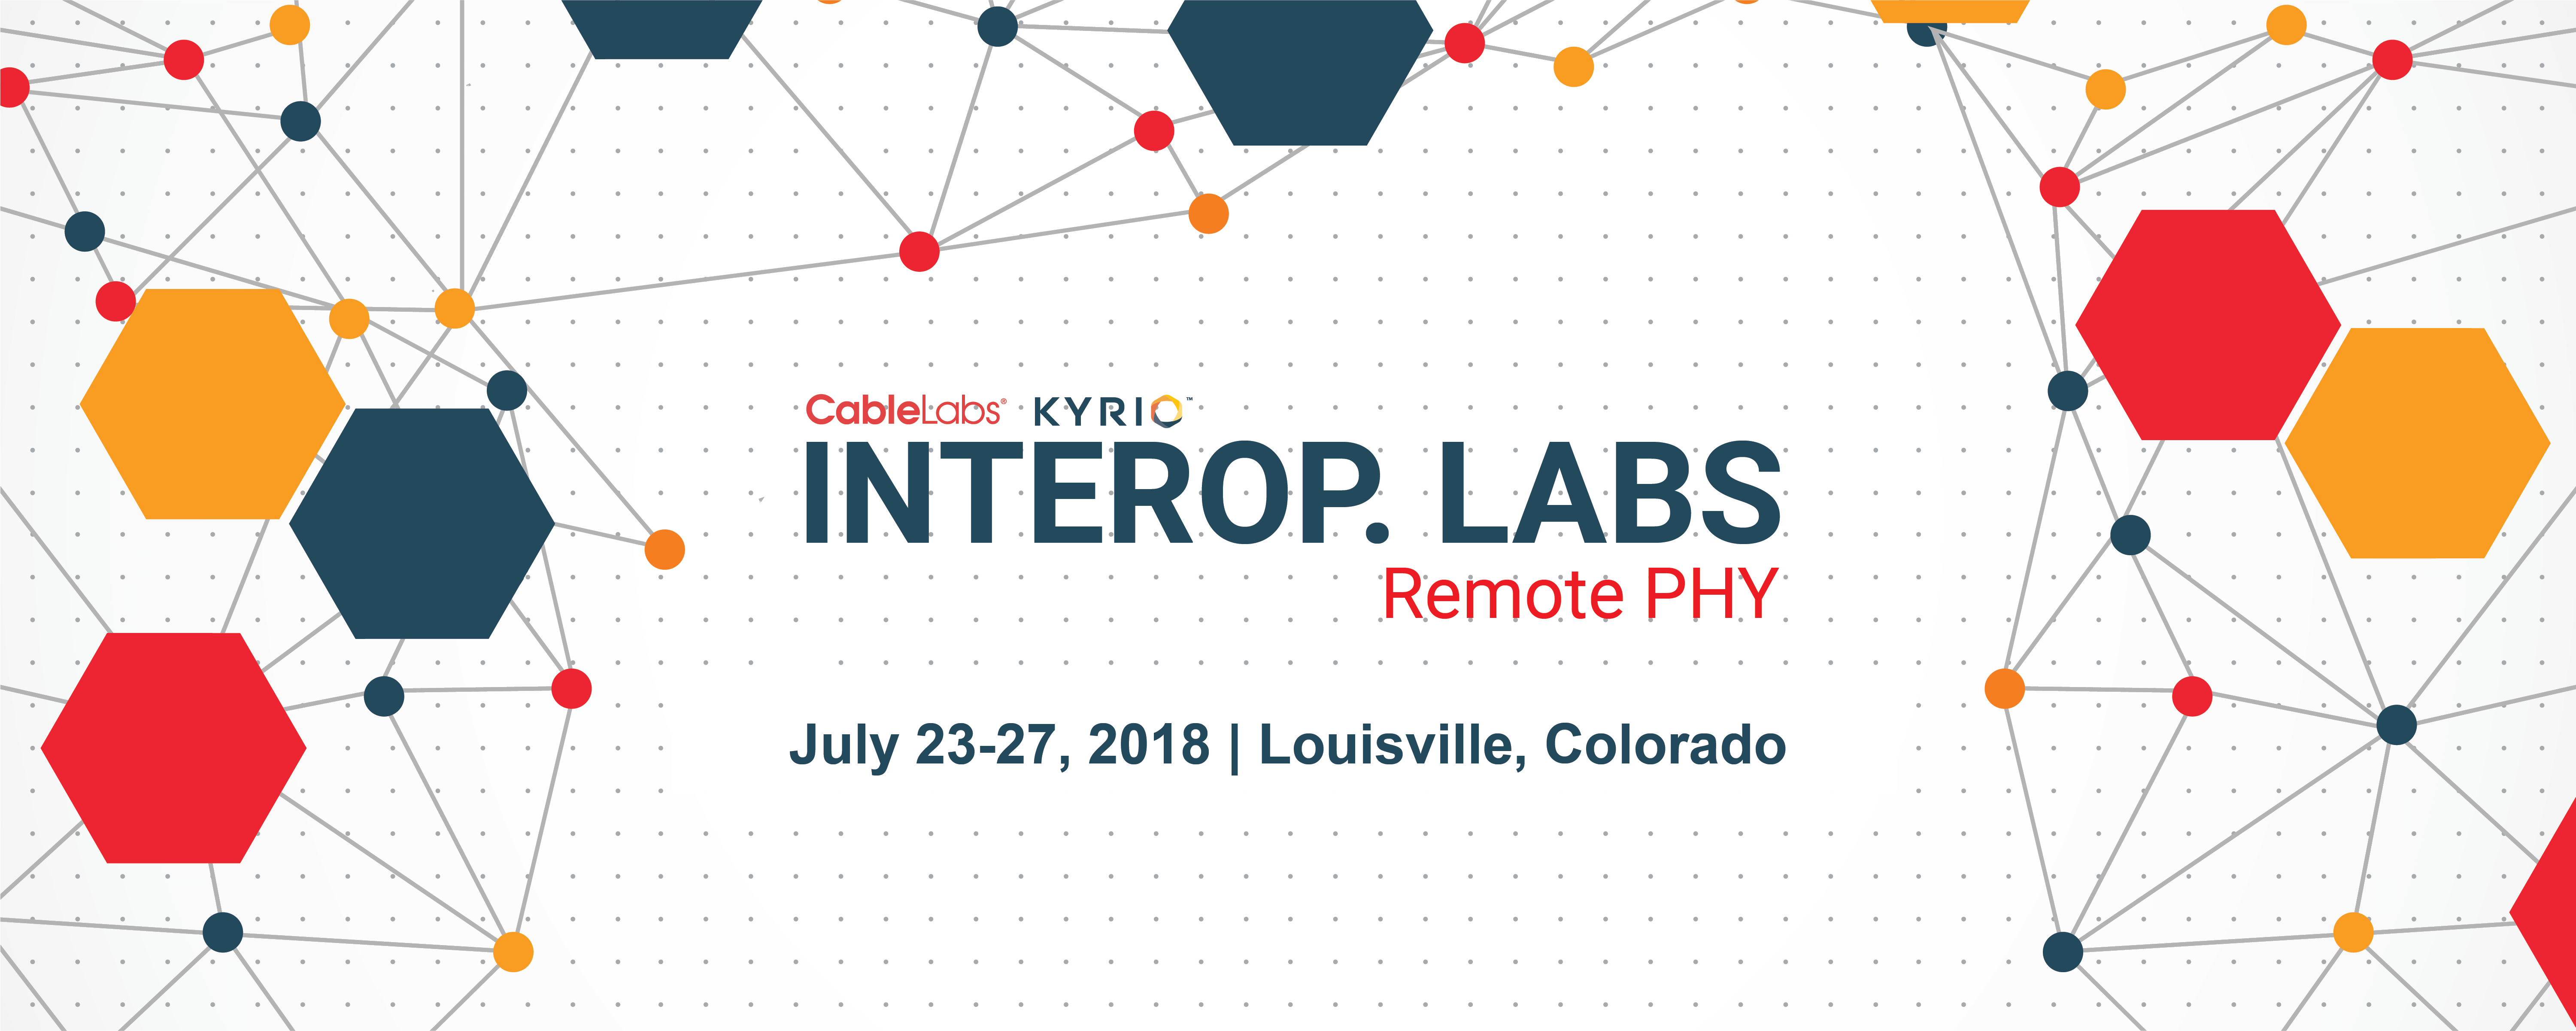 Interop. Labs: Remote PHY July 2018